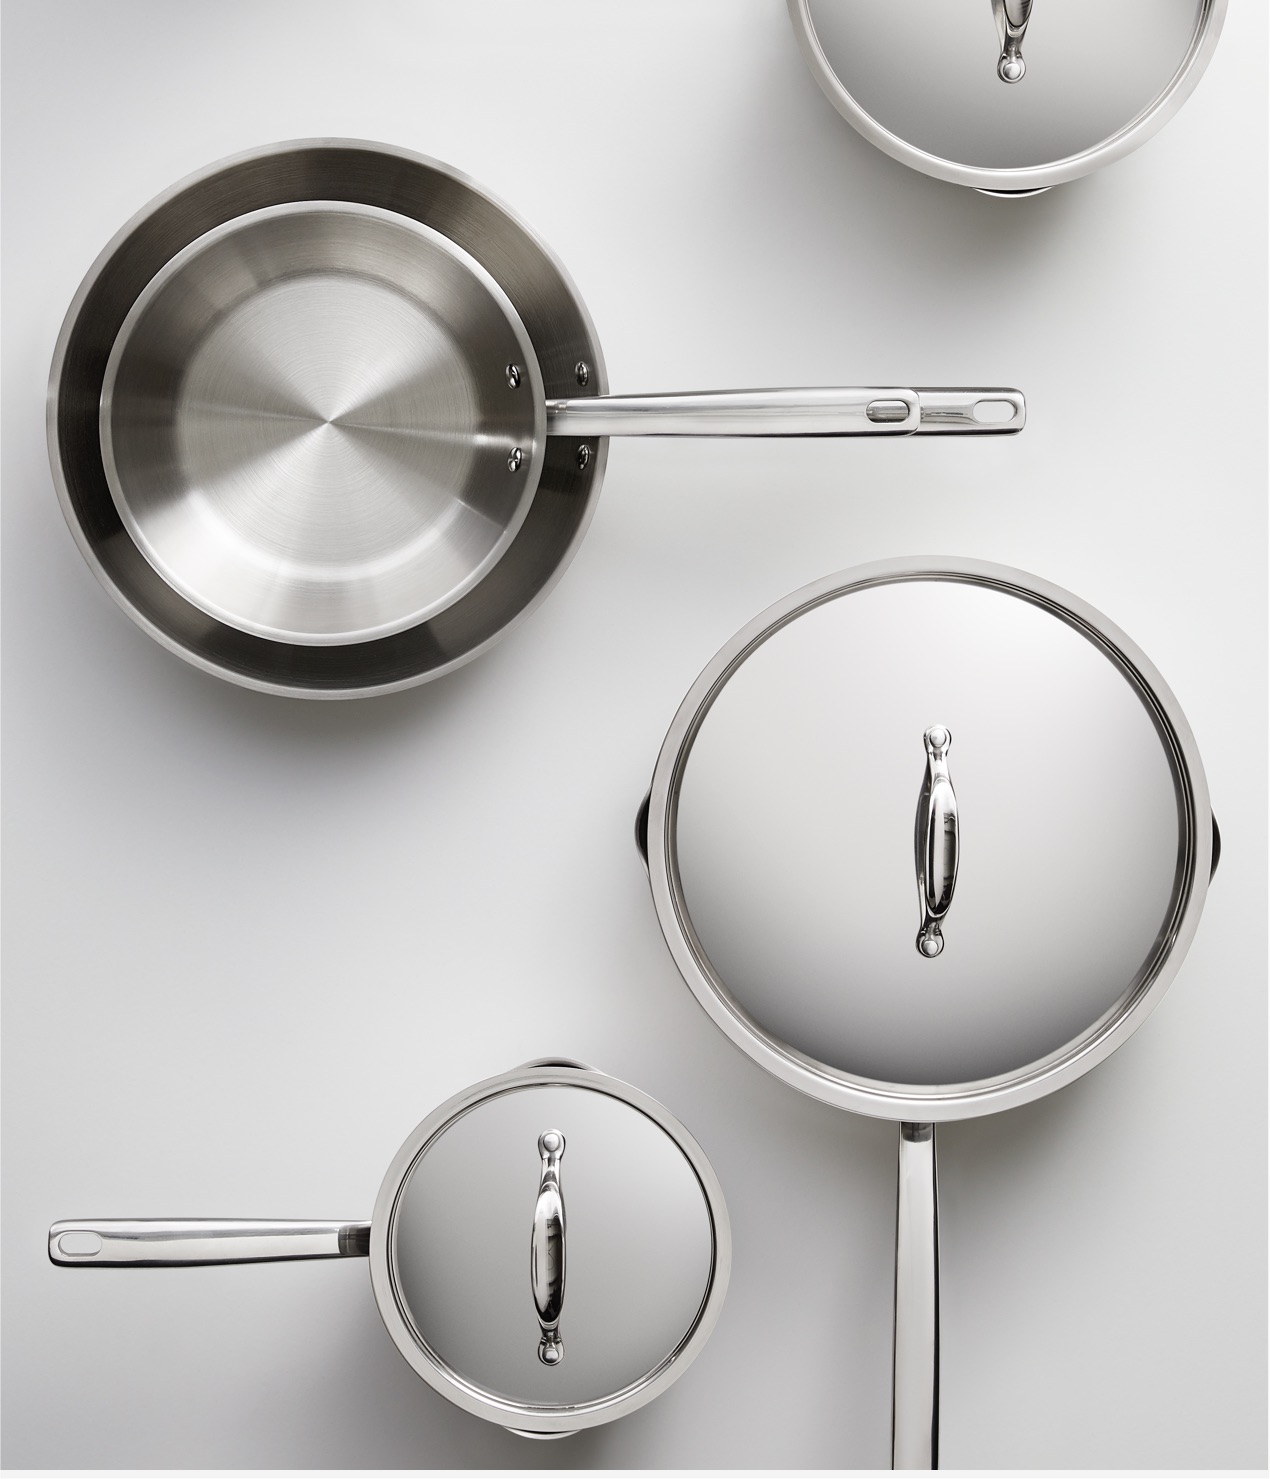 A variety of covered and uncovered stainless steel cookware